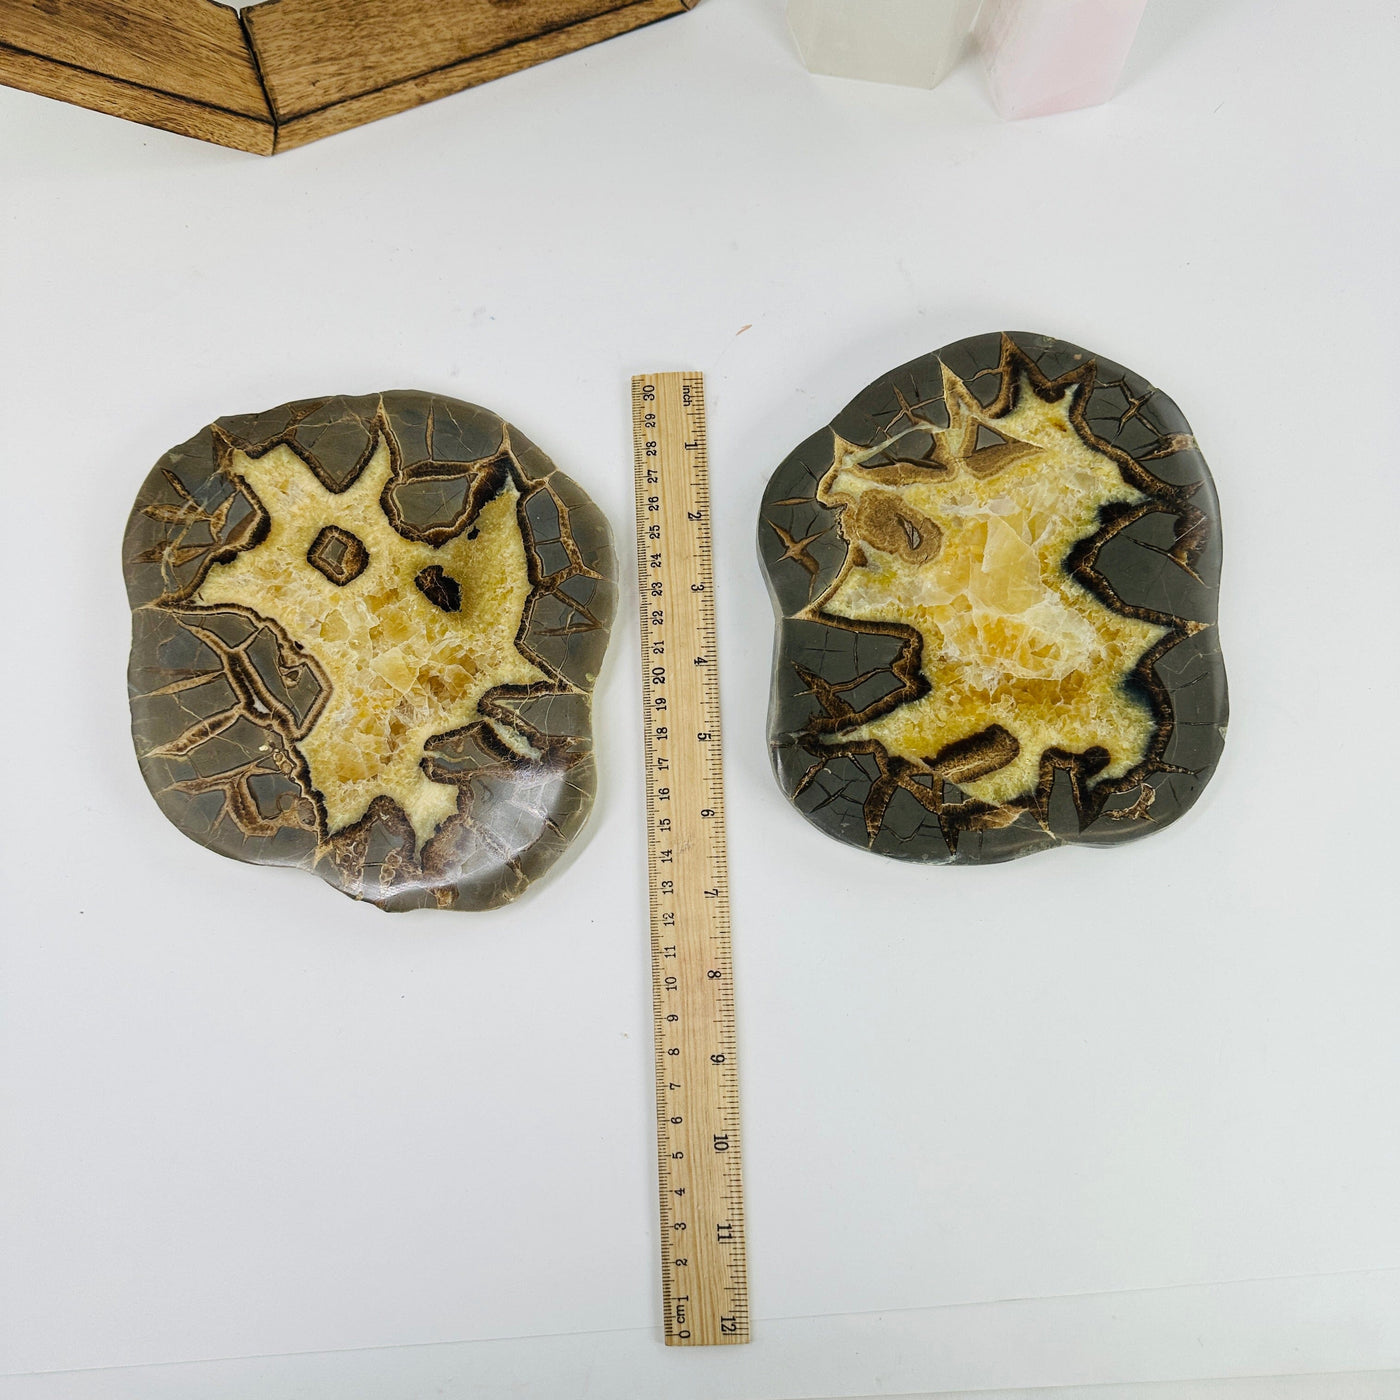 septarian coasters next to a ruler for size reference